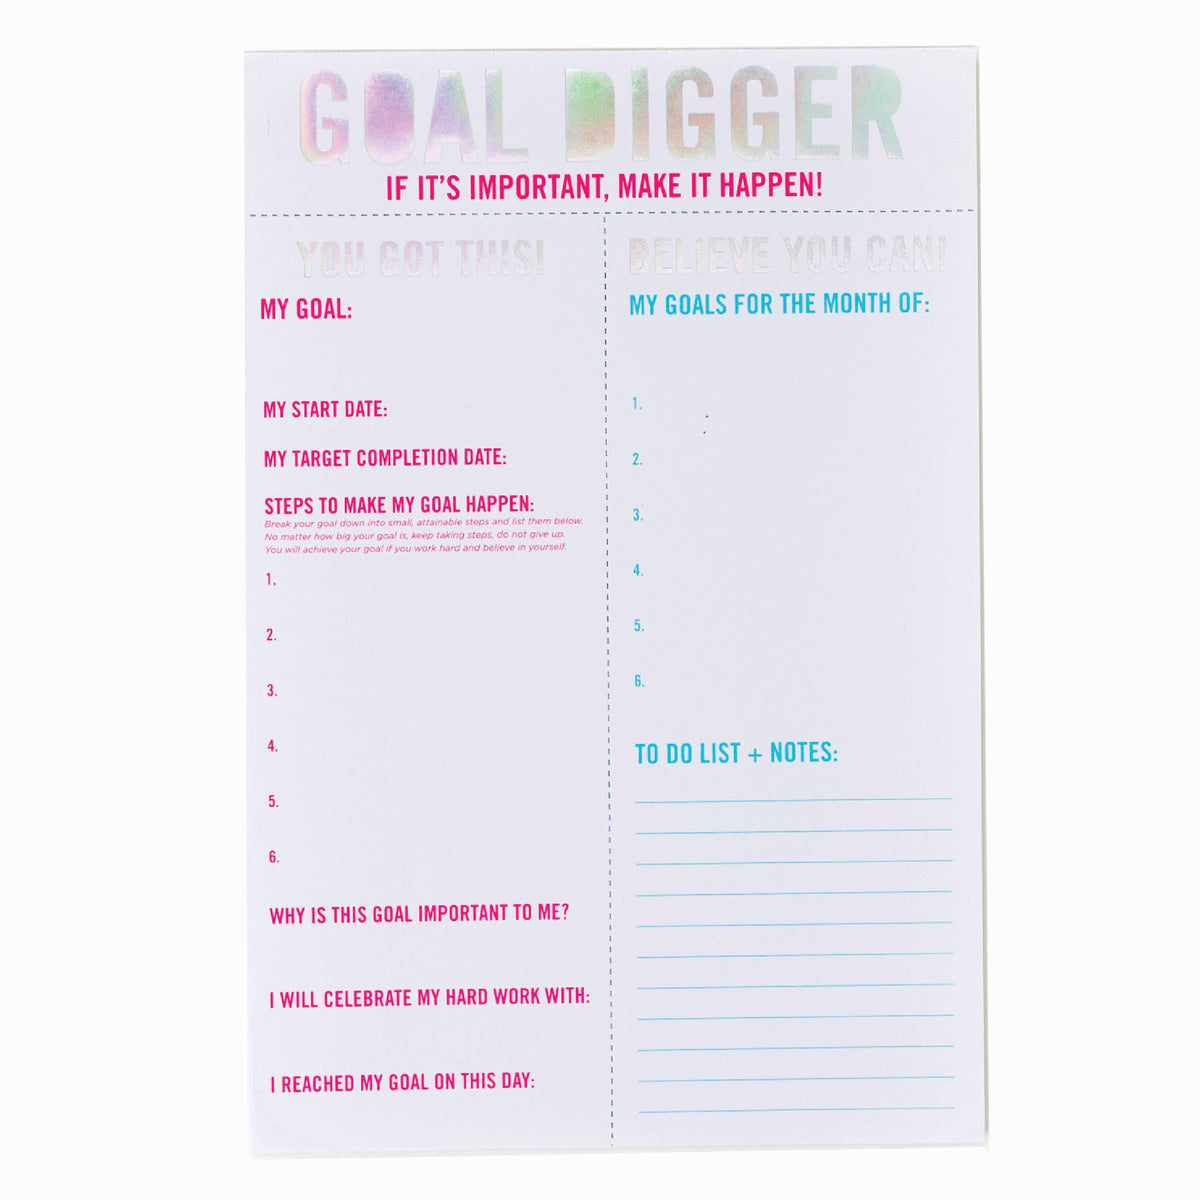 Goal Digger Goal Setting Notepad - The Preppy Bunny